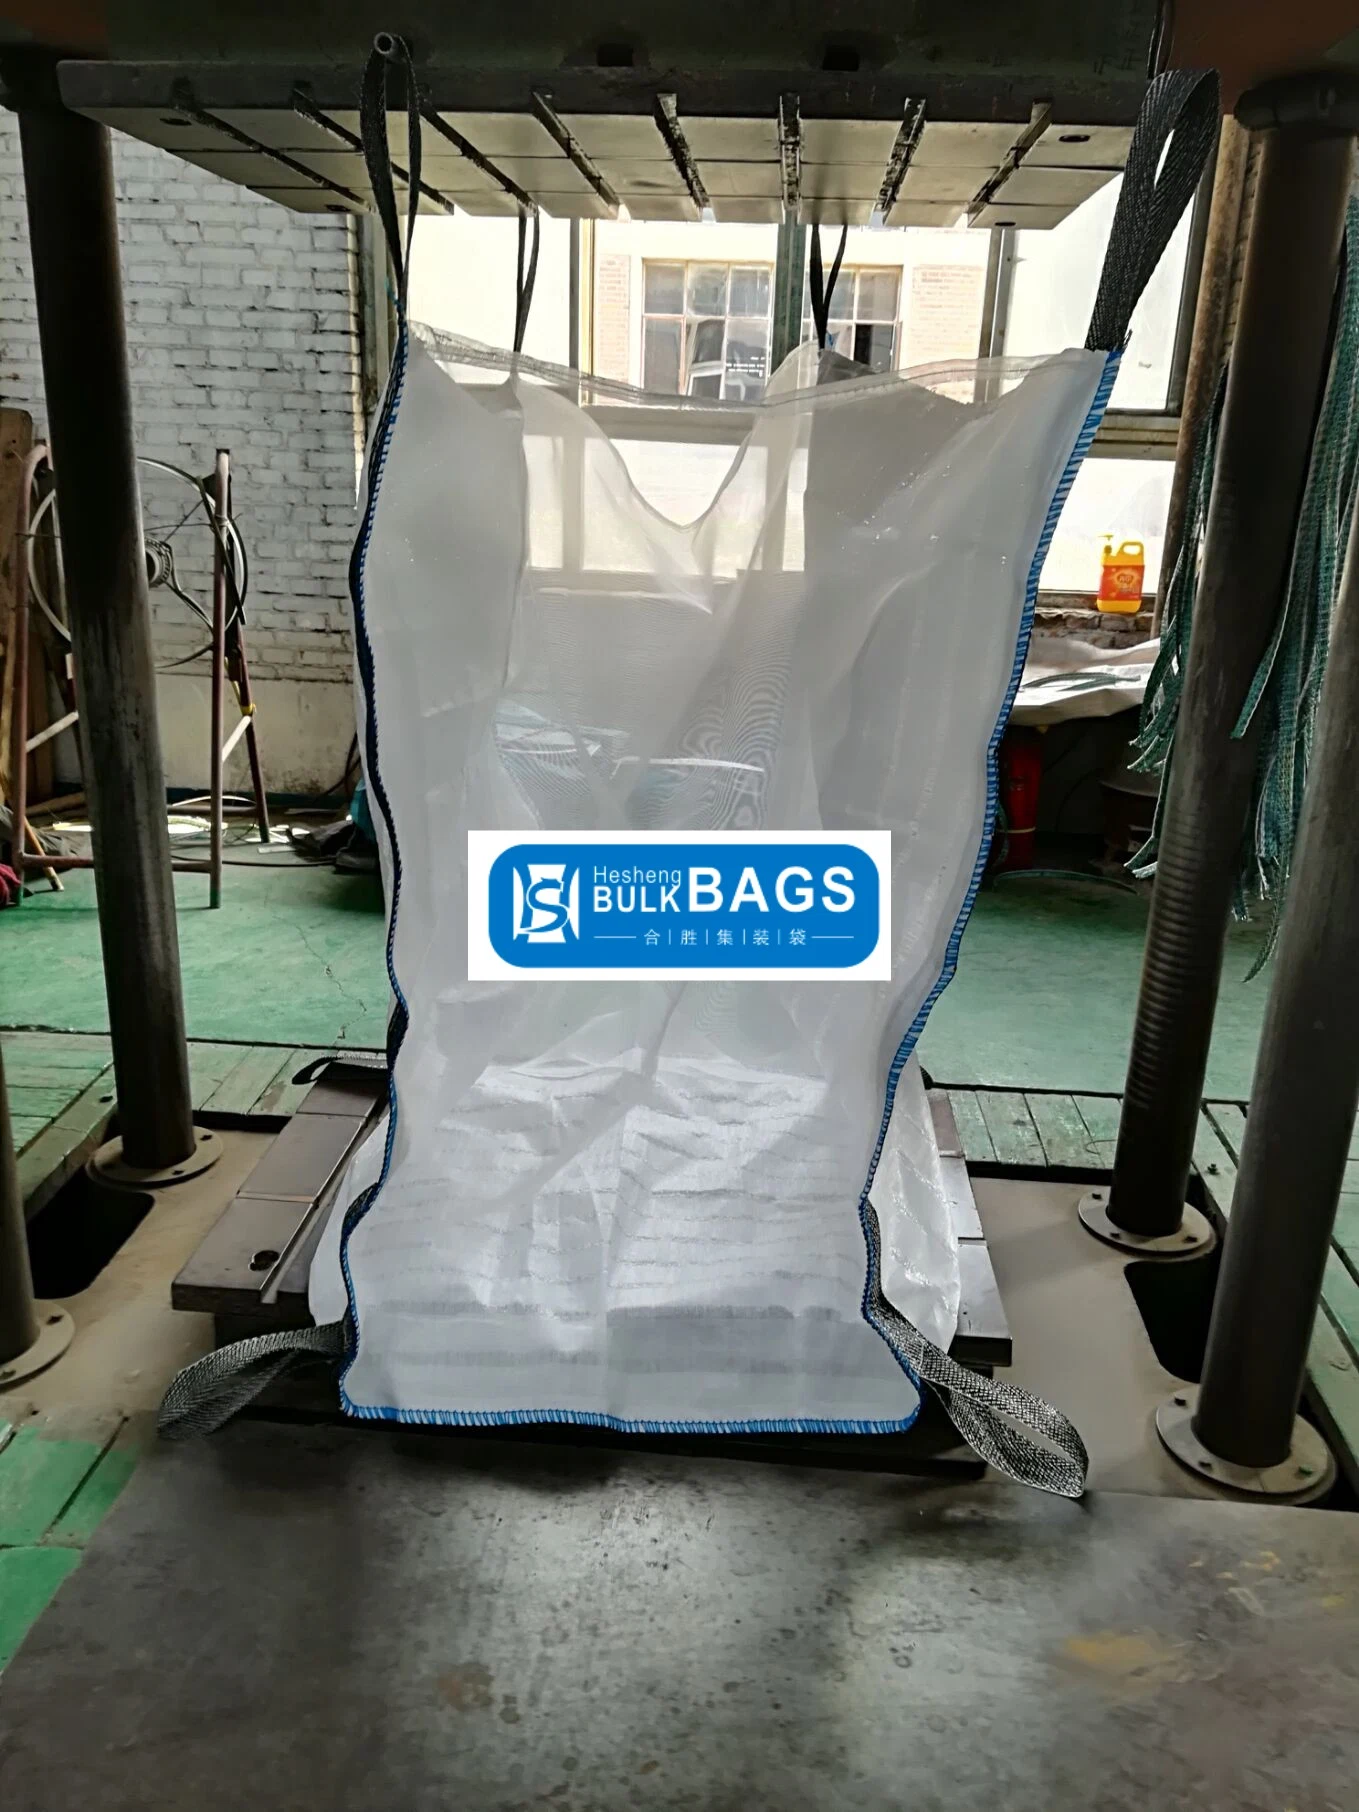 Hesheng Big Firewood Bags Used for Packing Fire Wood Super Sack